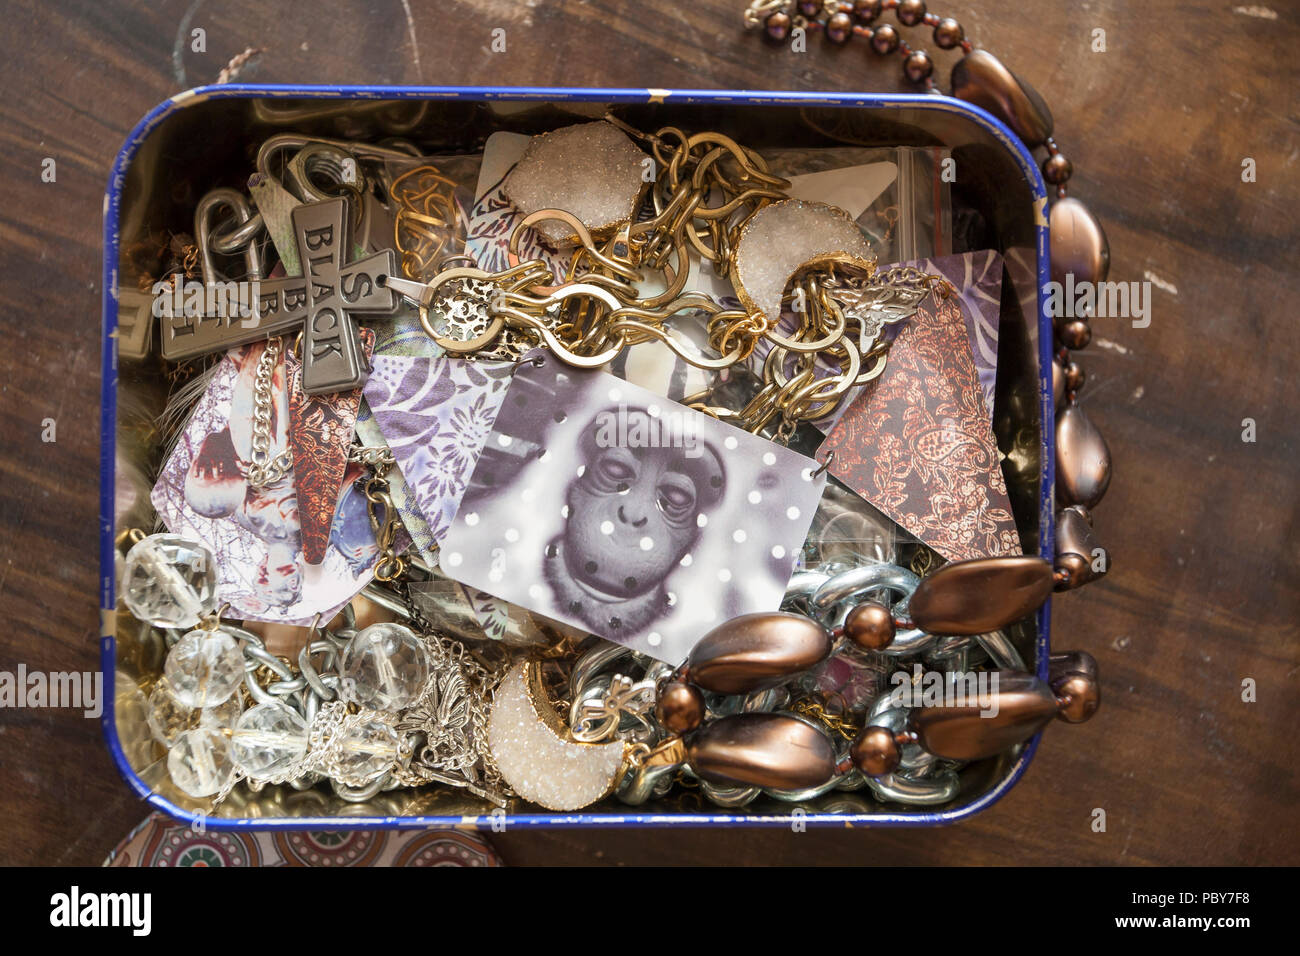 Jewelry box filled with original cool jewelry Stock Photo